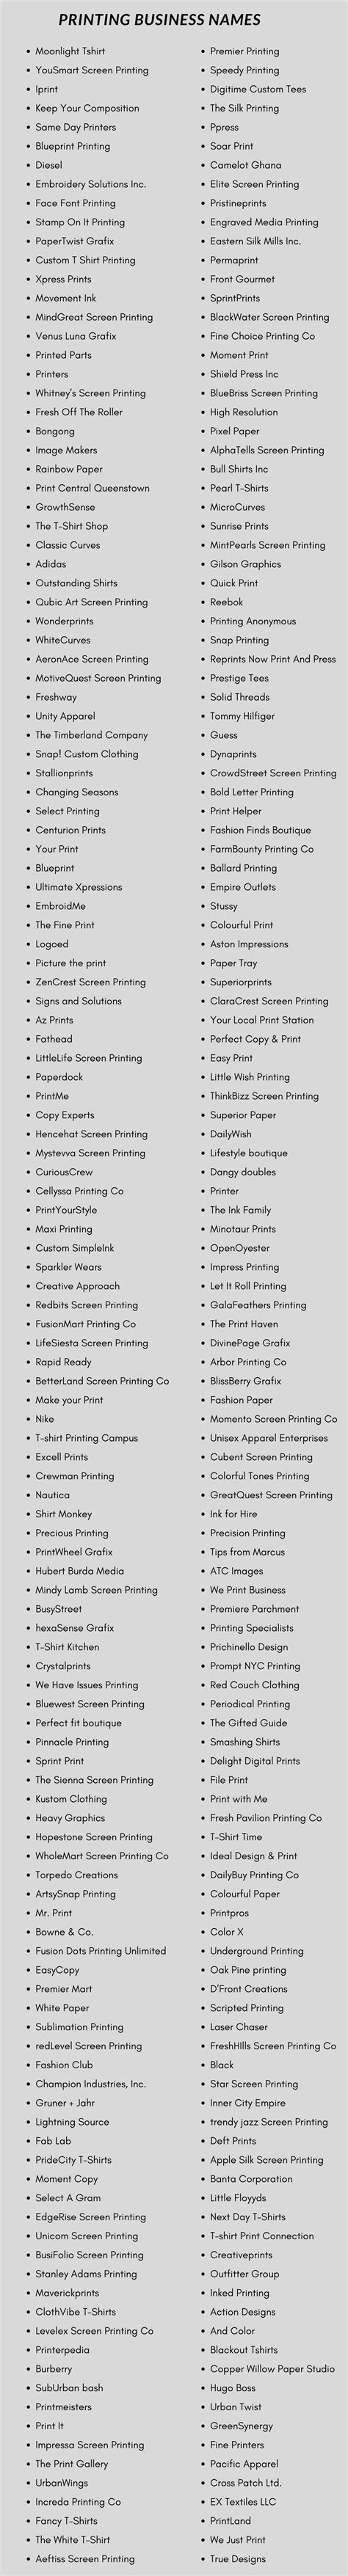 650 Catchy Names For Your Printing Business